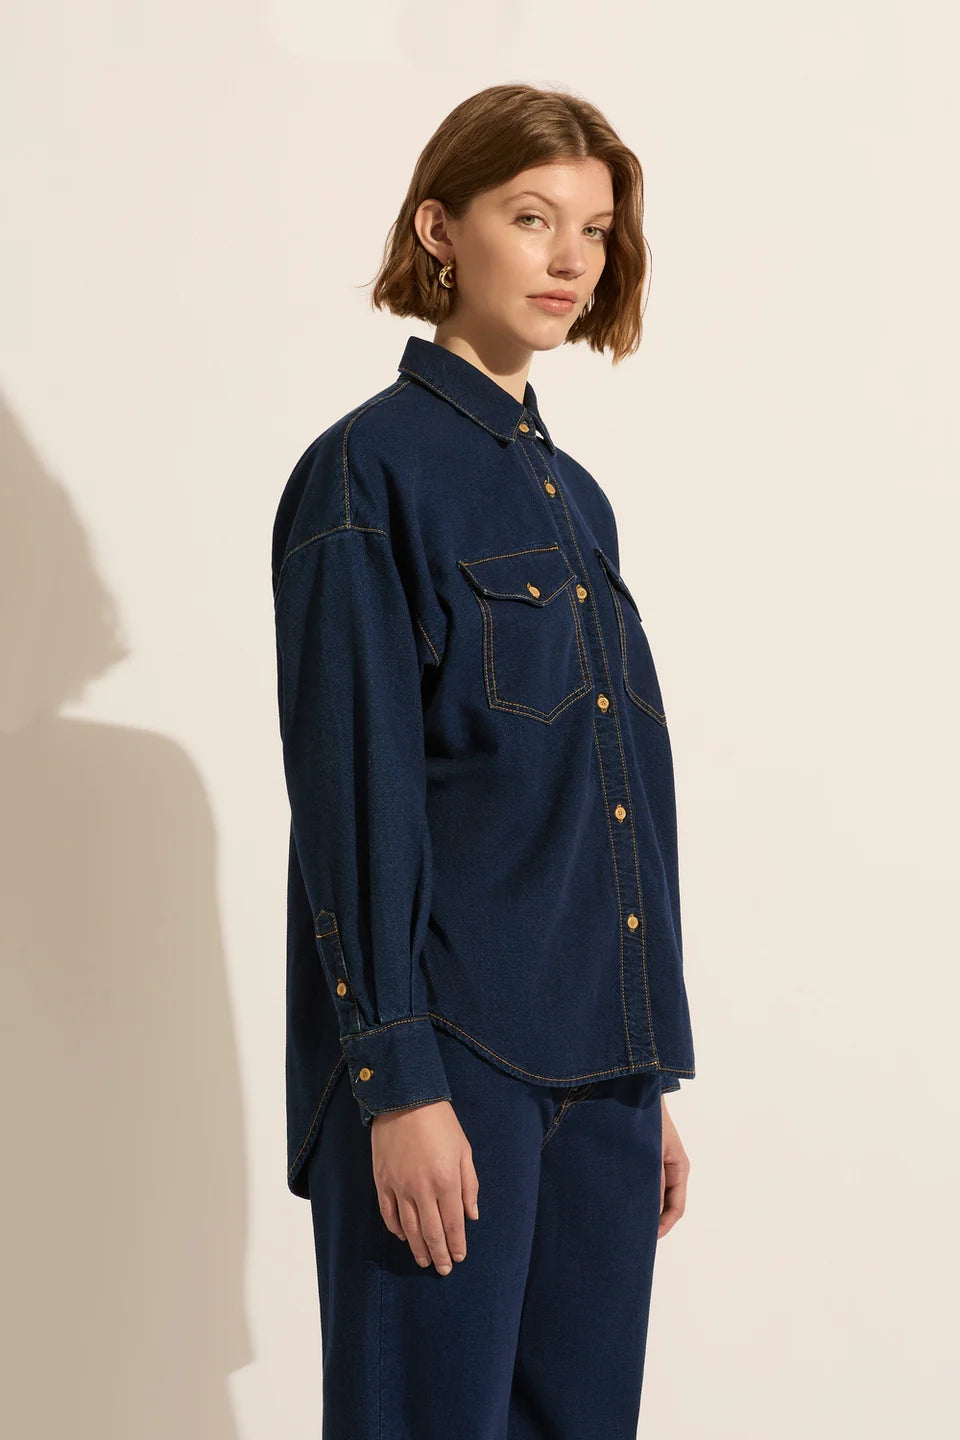 Amelia Long Sleeve Shirt in Vision